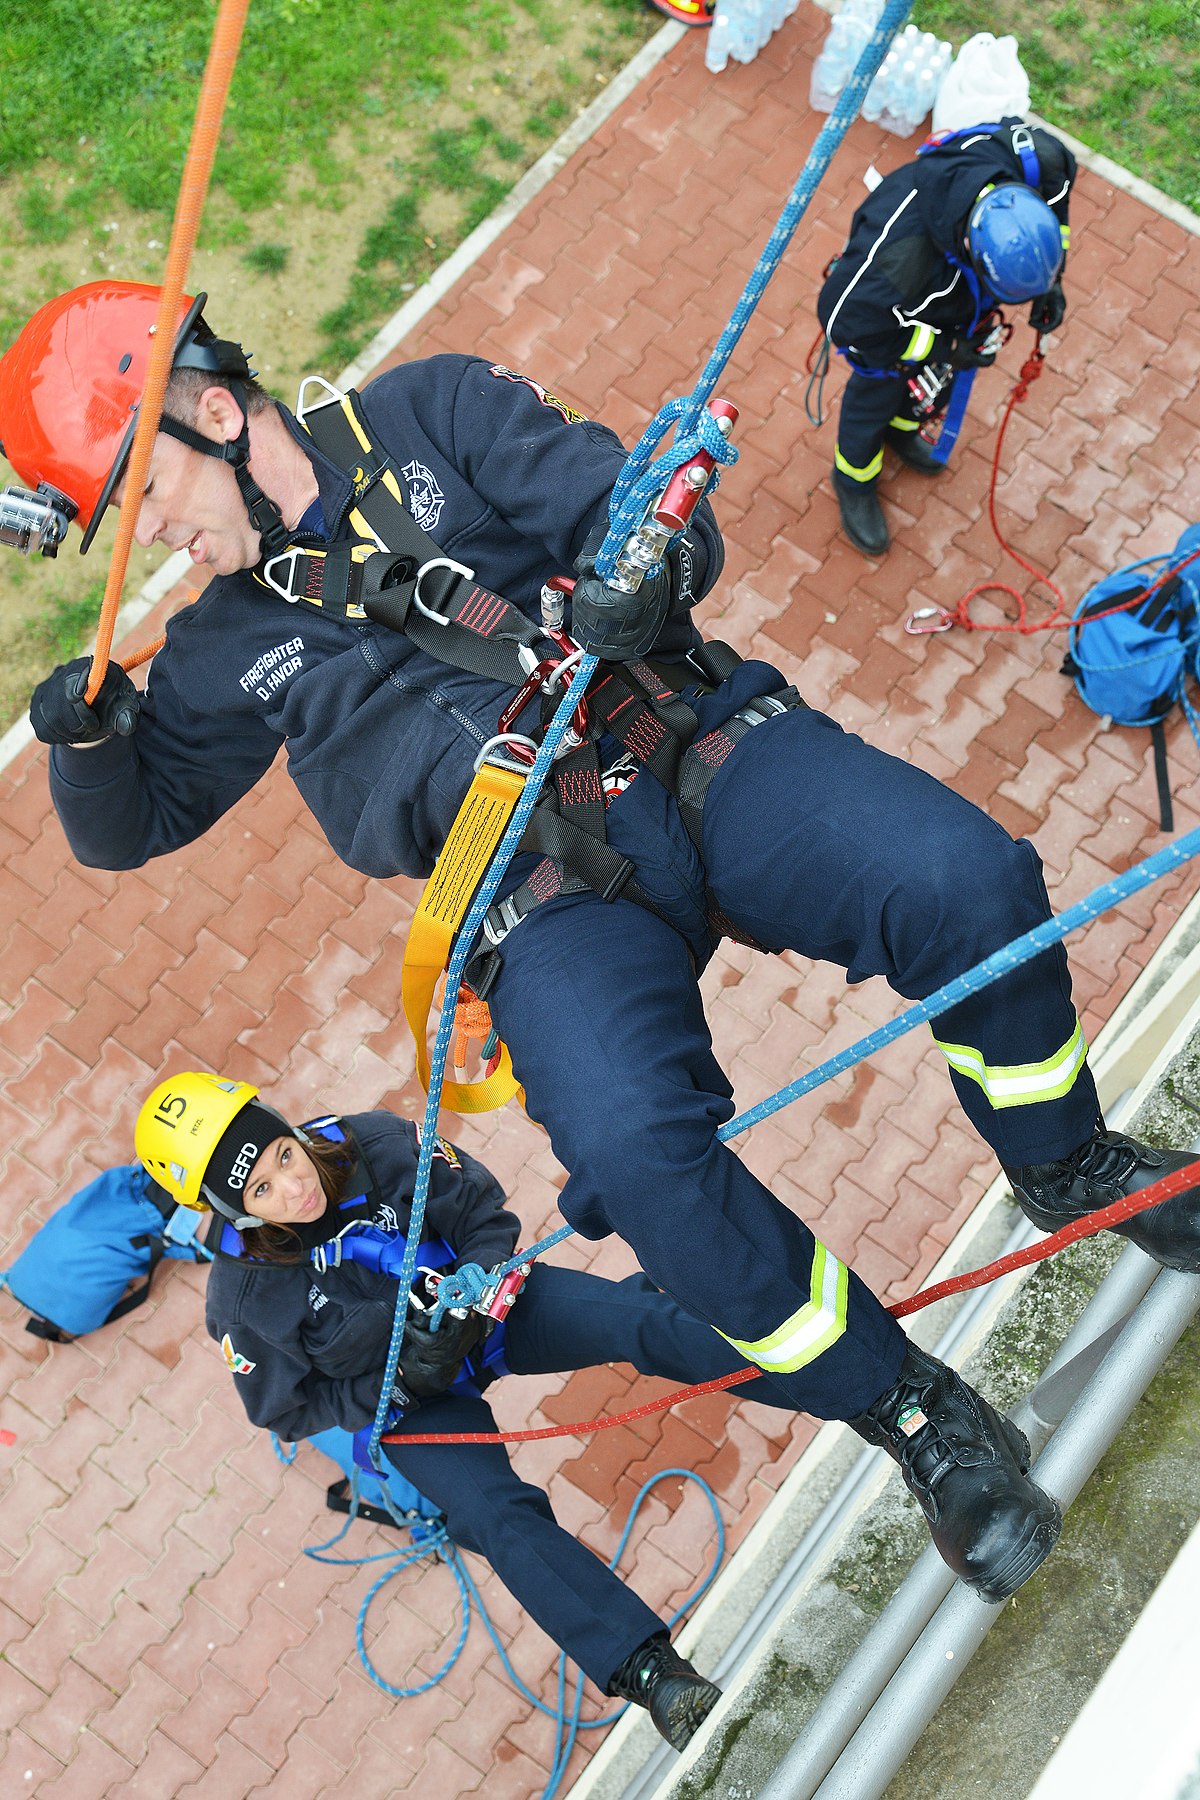 File:DOD TECHNICAL ROPE RESCUE 1, USAG ITALY FIRE DEPARTMENT  161110-A-JM436-129.jpg - Wikimedia Commons